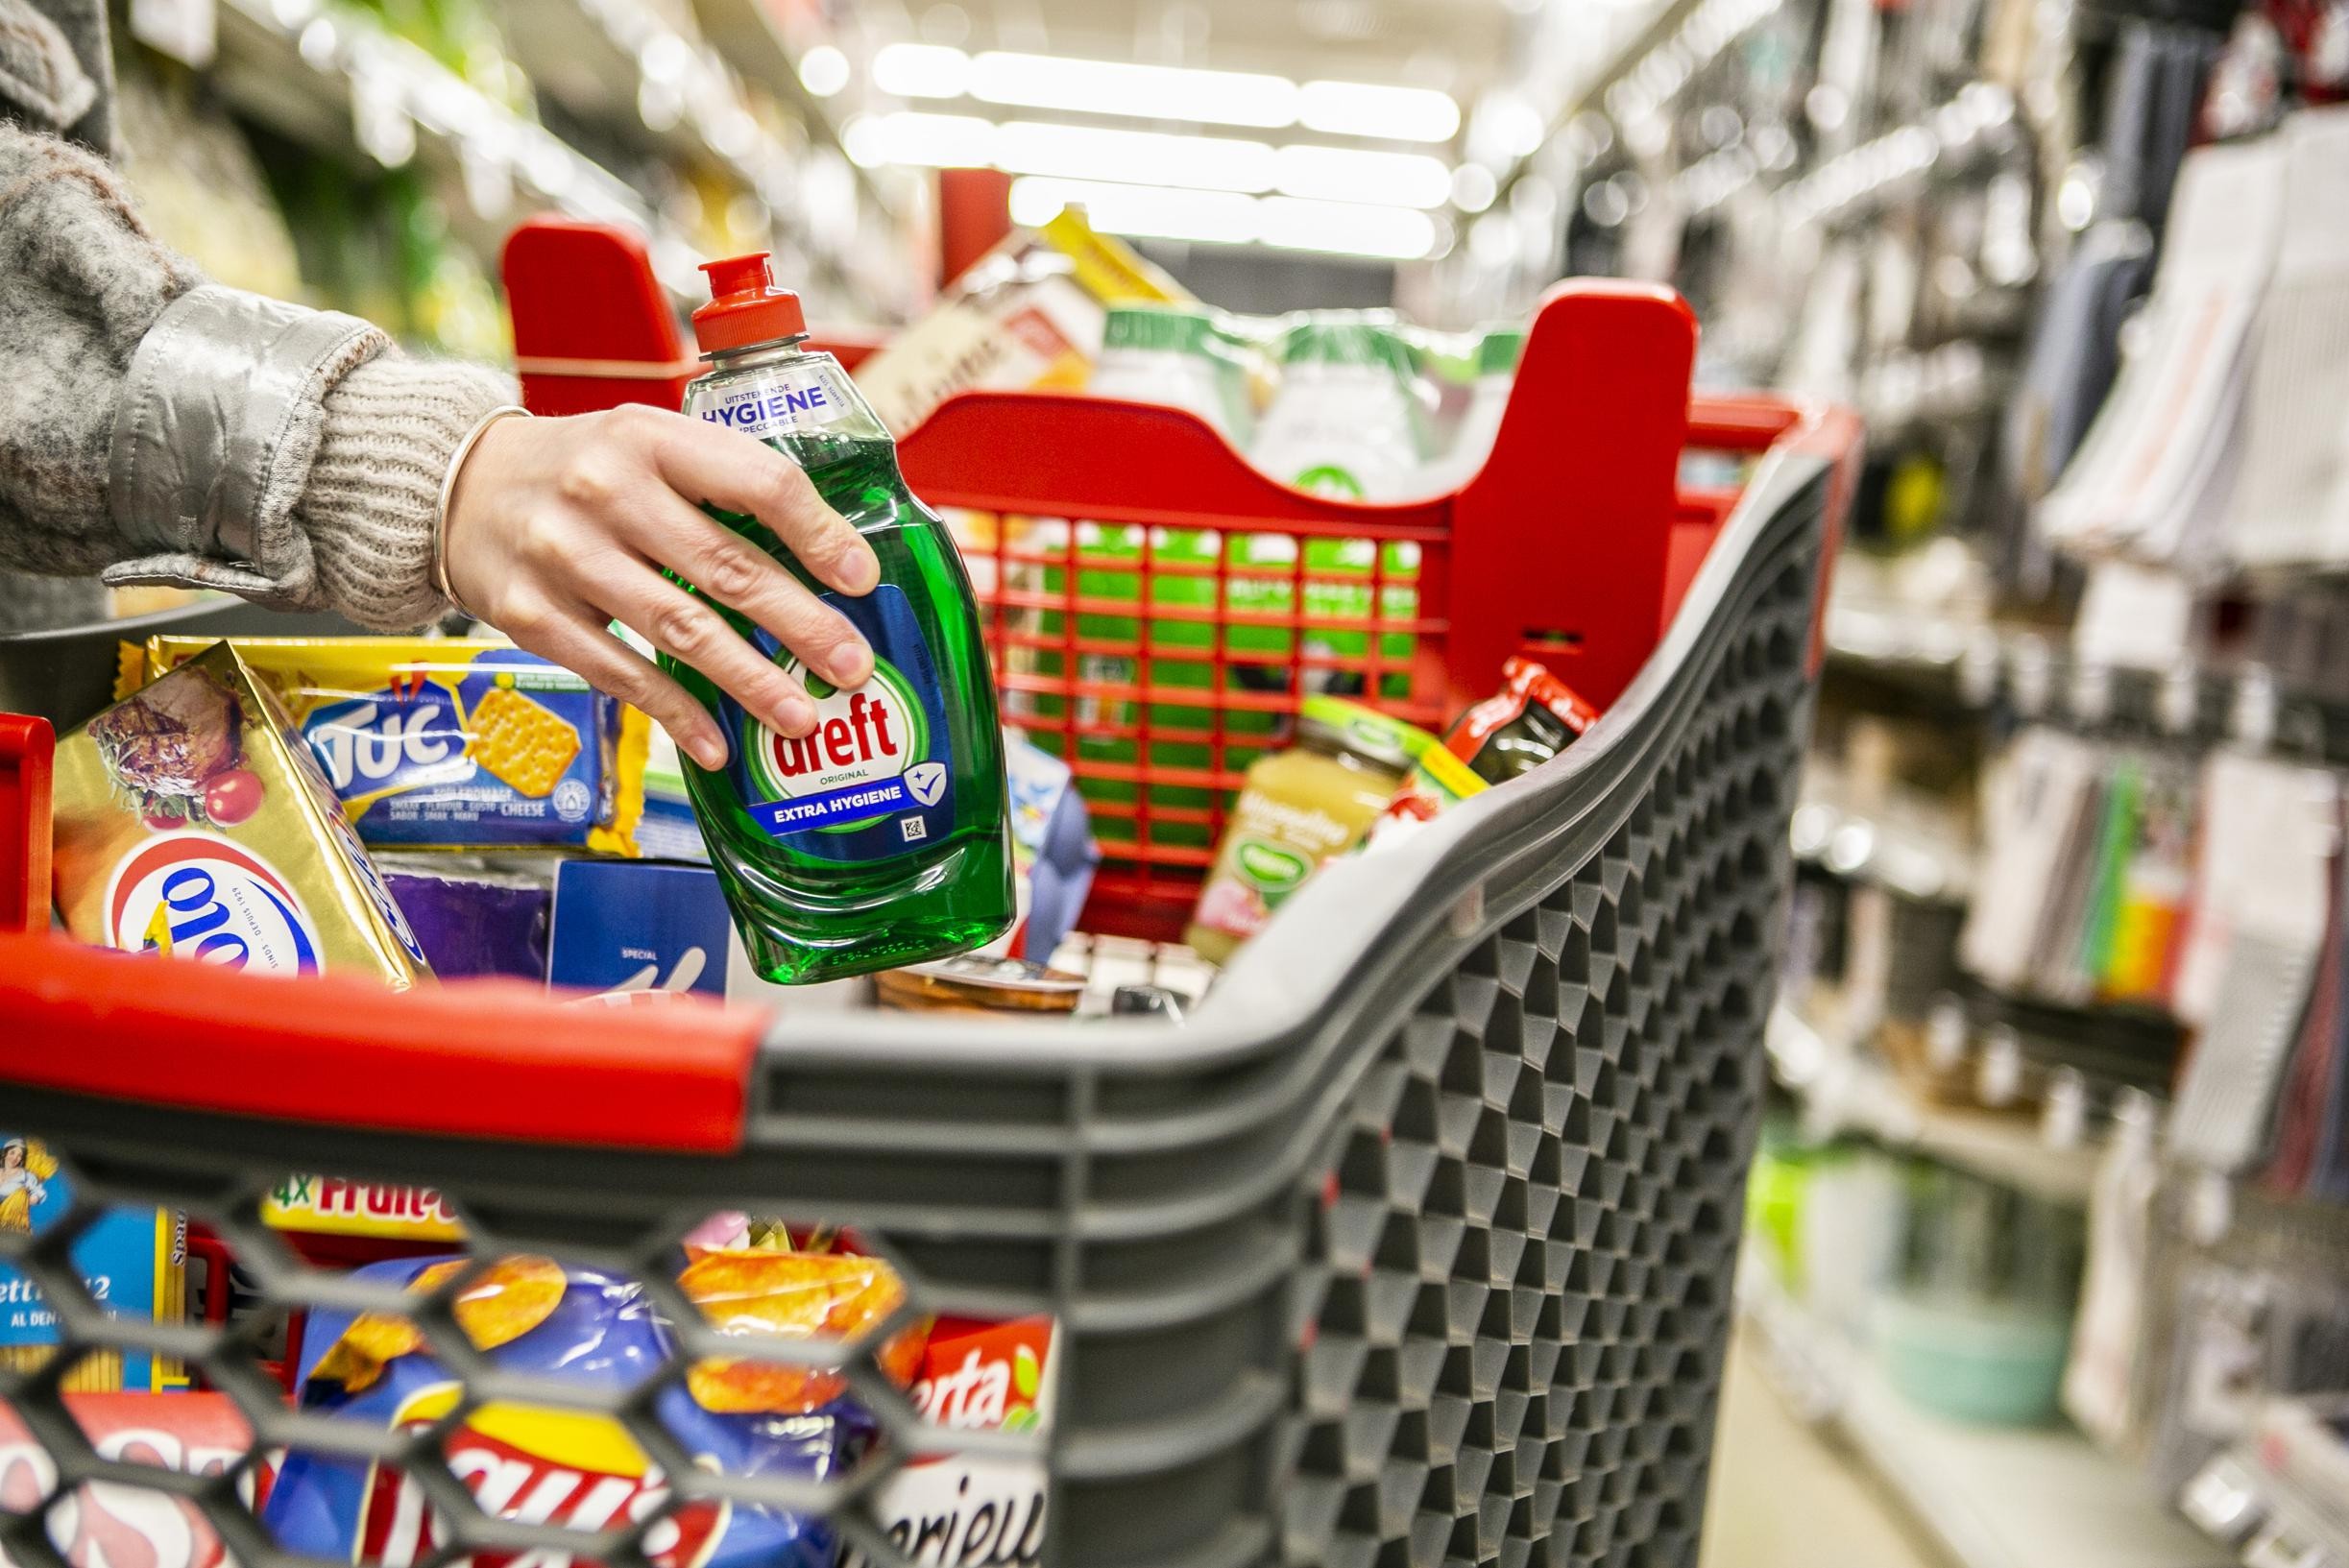 Our shopping cart costs 3.4 percent more than last year